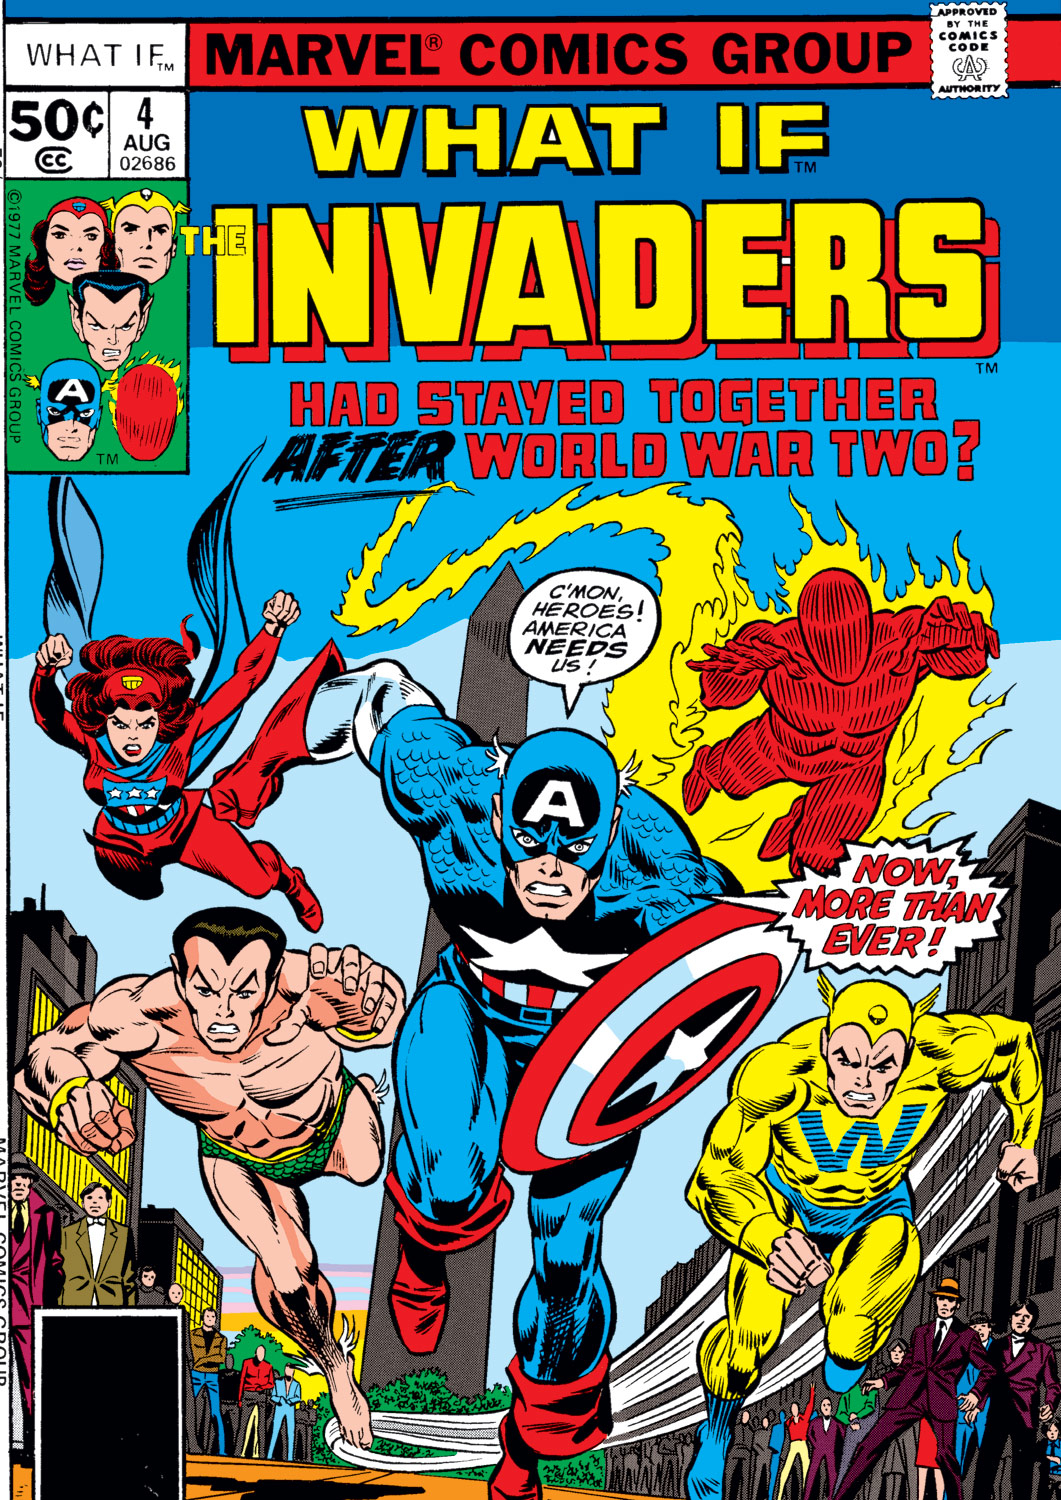 What If? (1977) issue 4 - The Invaders had stayed together after World War Two - Page 1